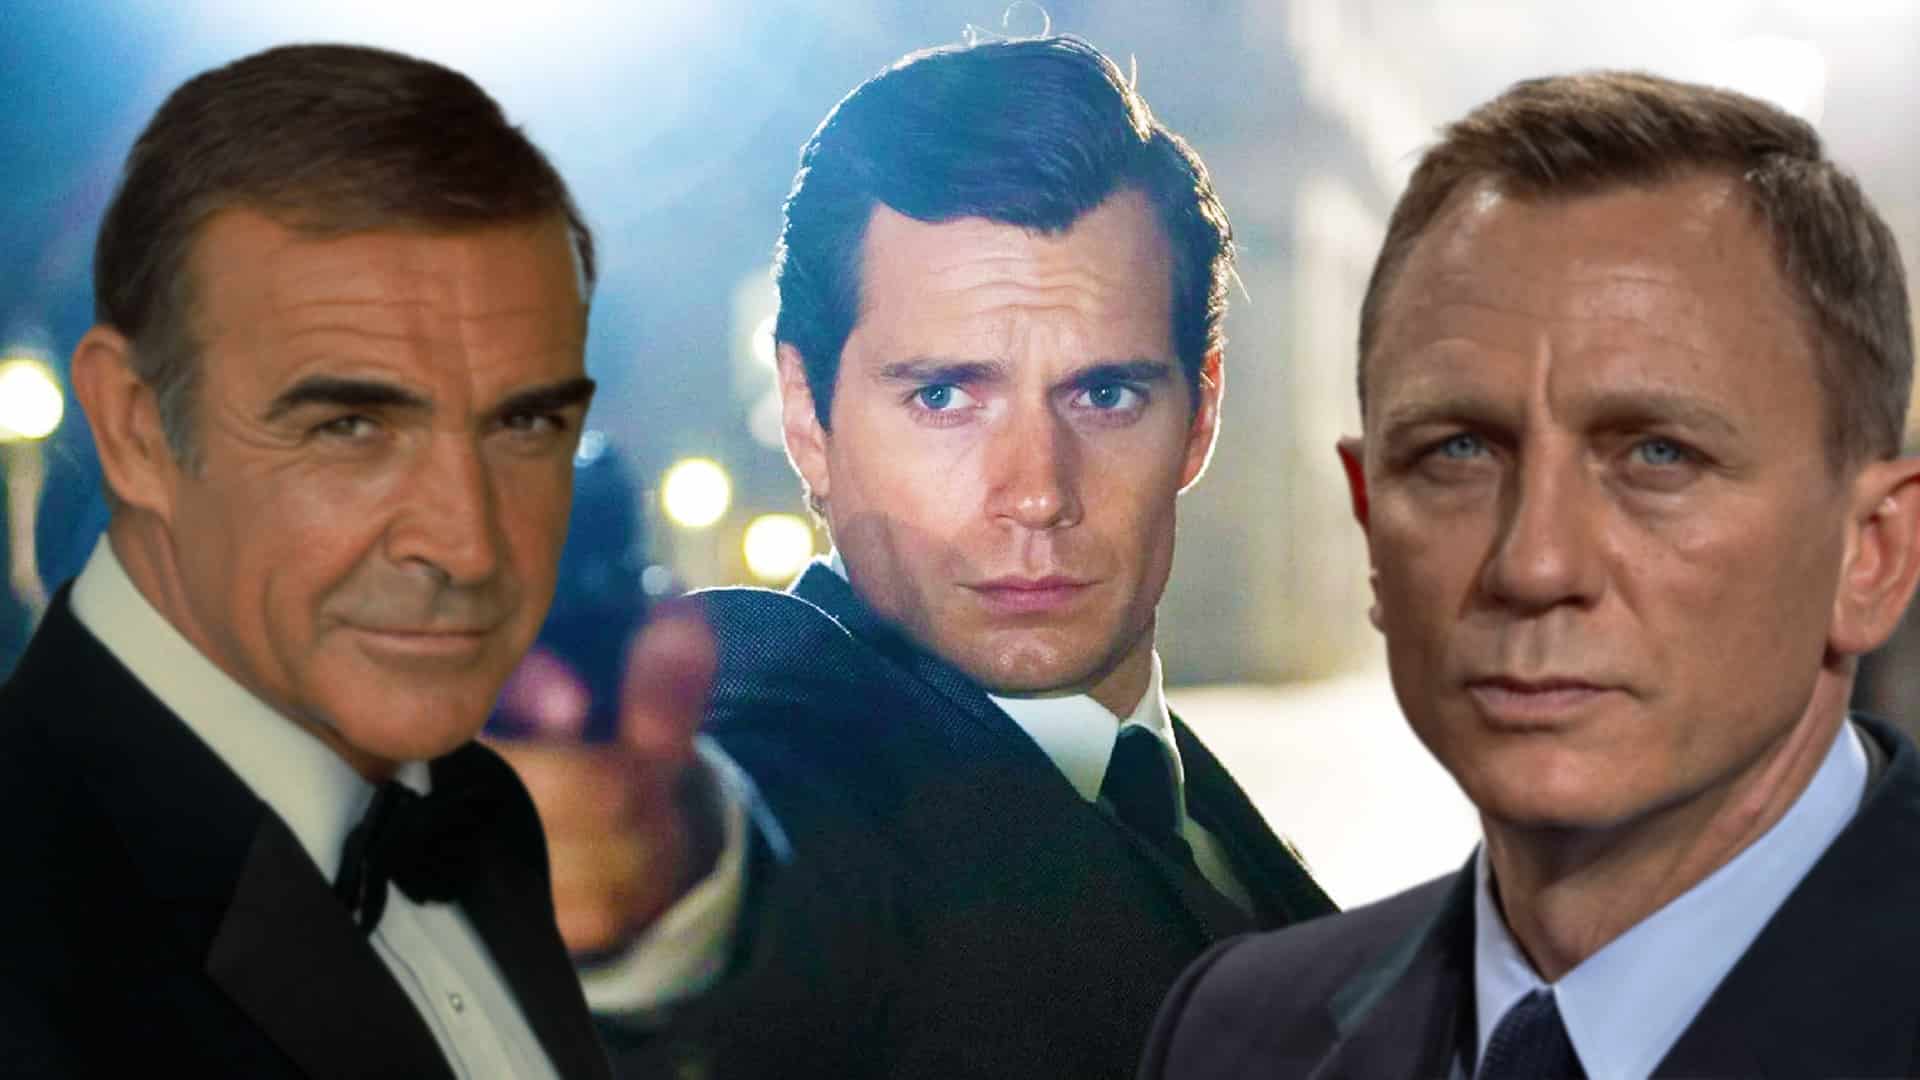 Henry Cavill was very nearly the youngest Bond in history